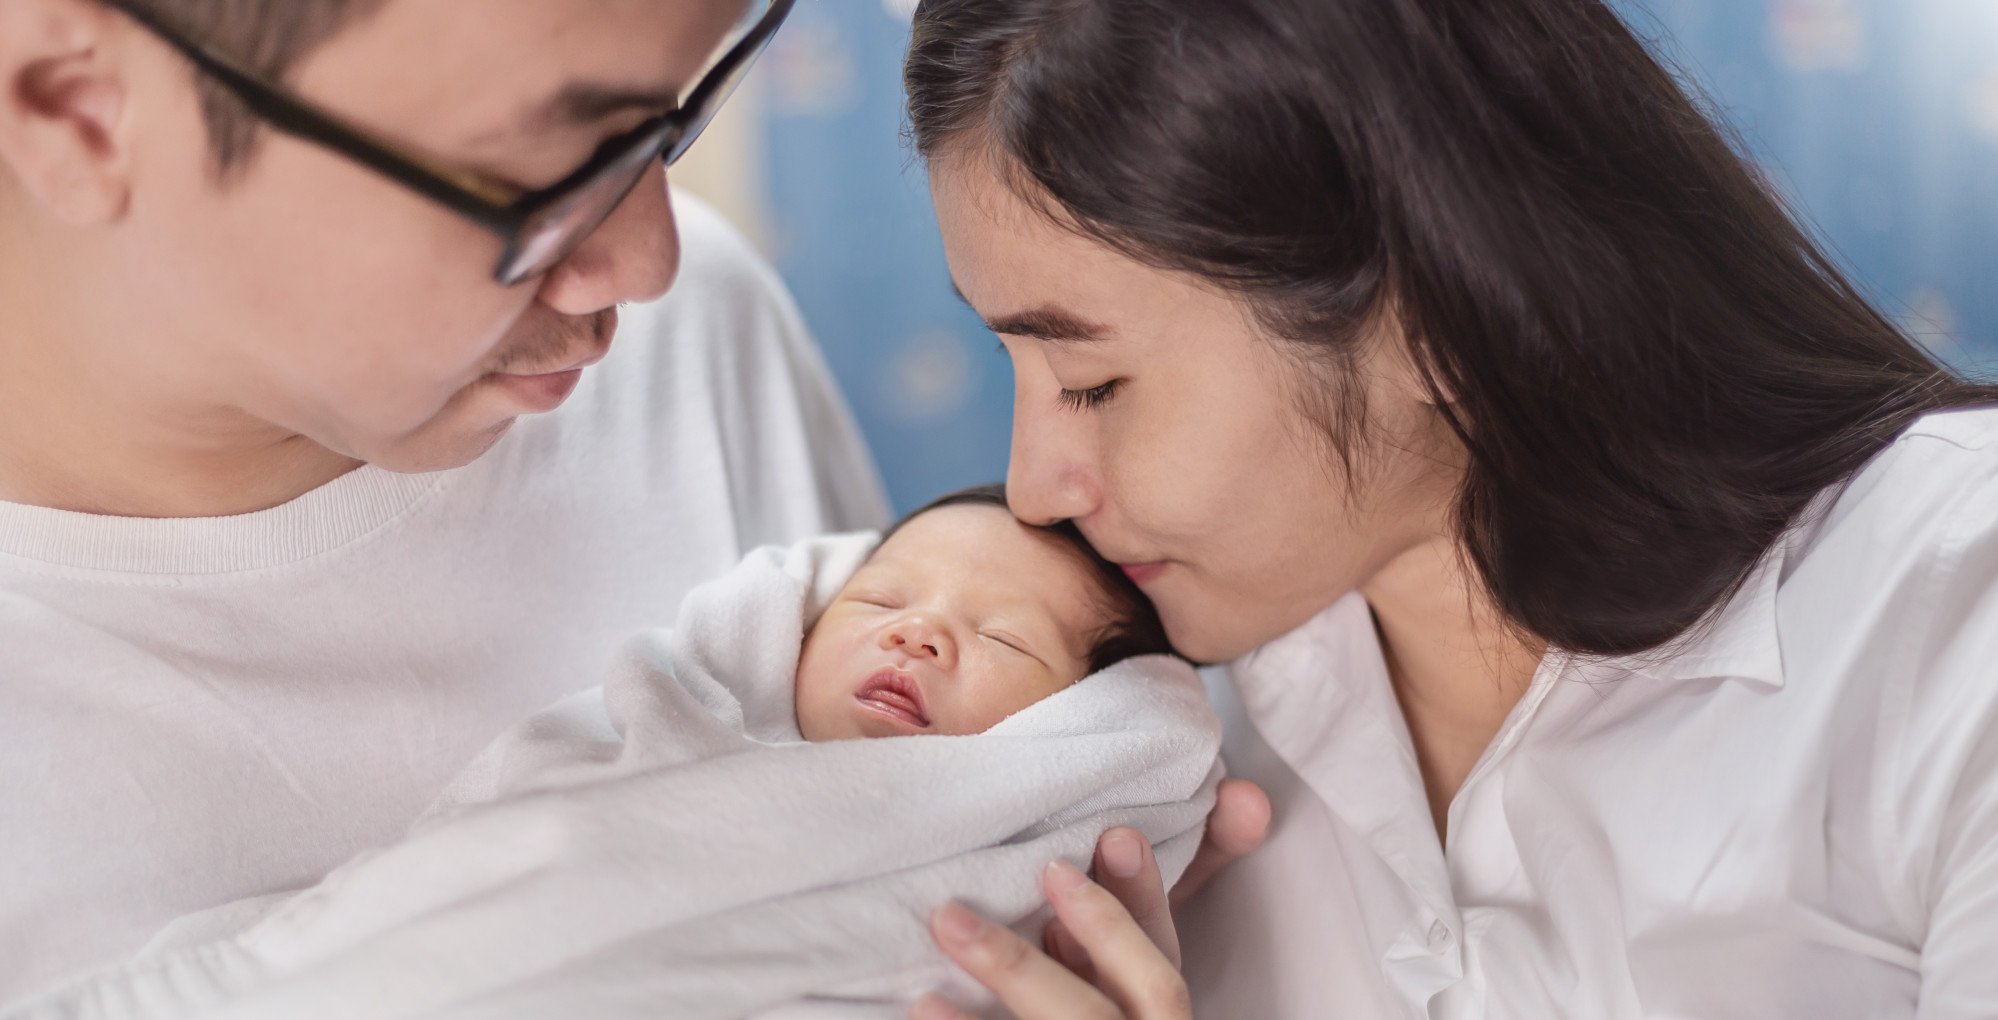 Both Kang and the nurse say they feel proud of their teamwork during the birth to see the baby safely delivered. Photo: Shutterstock